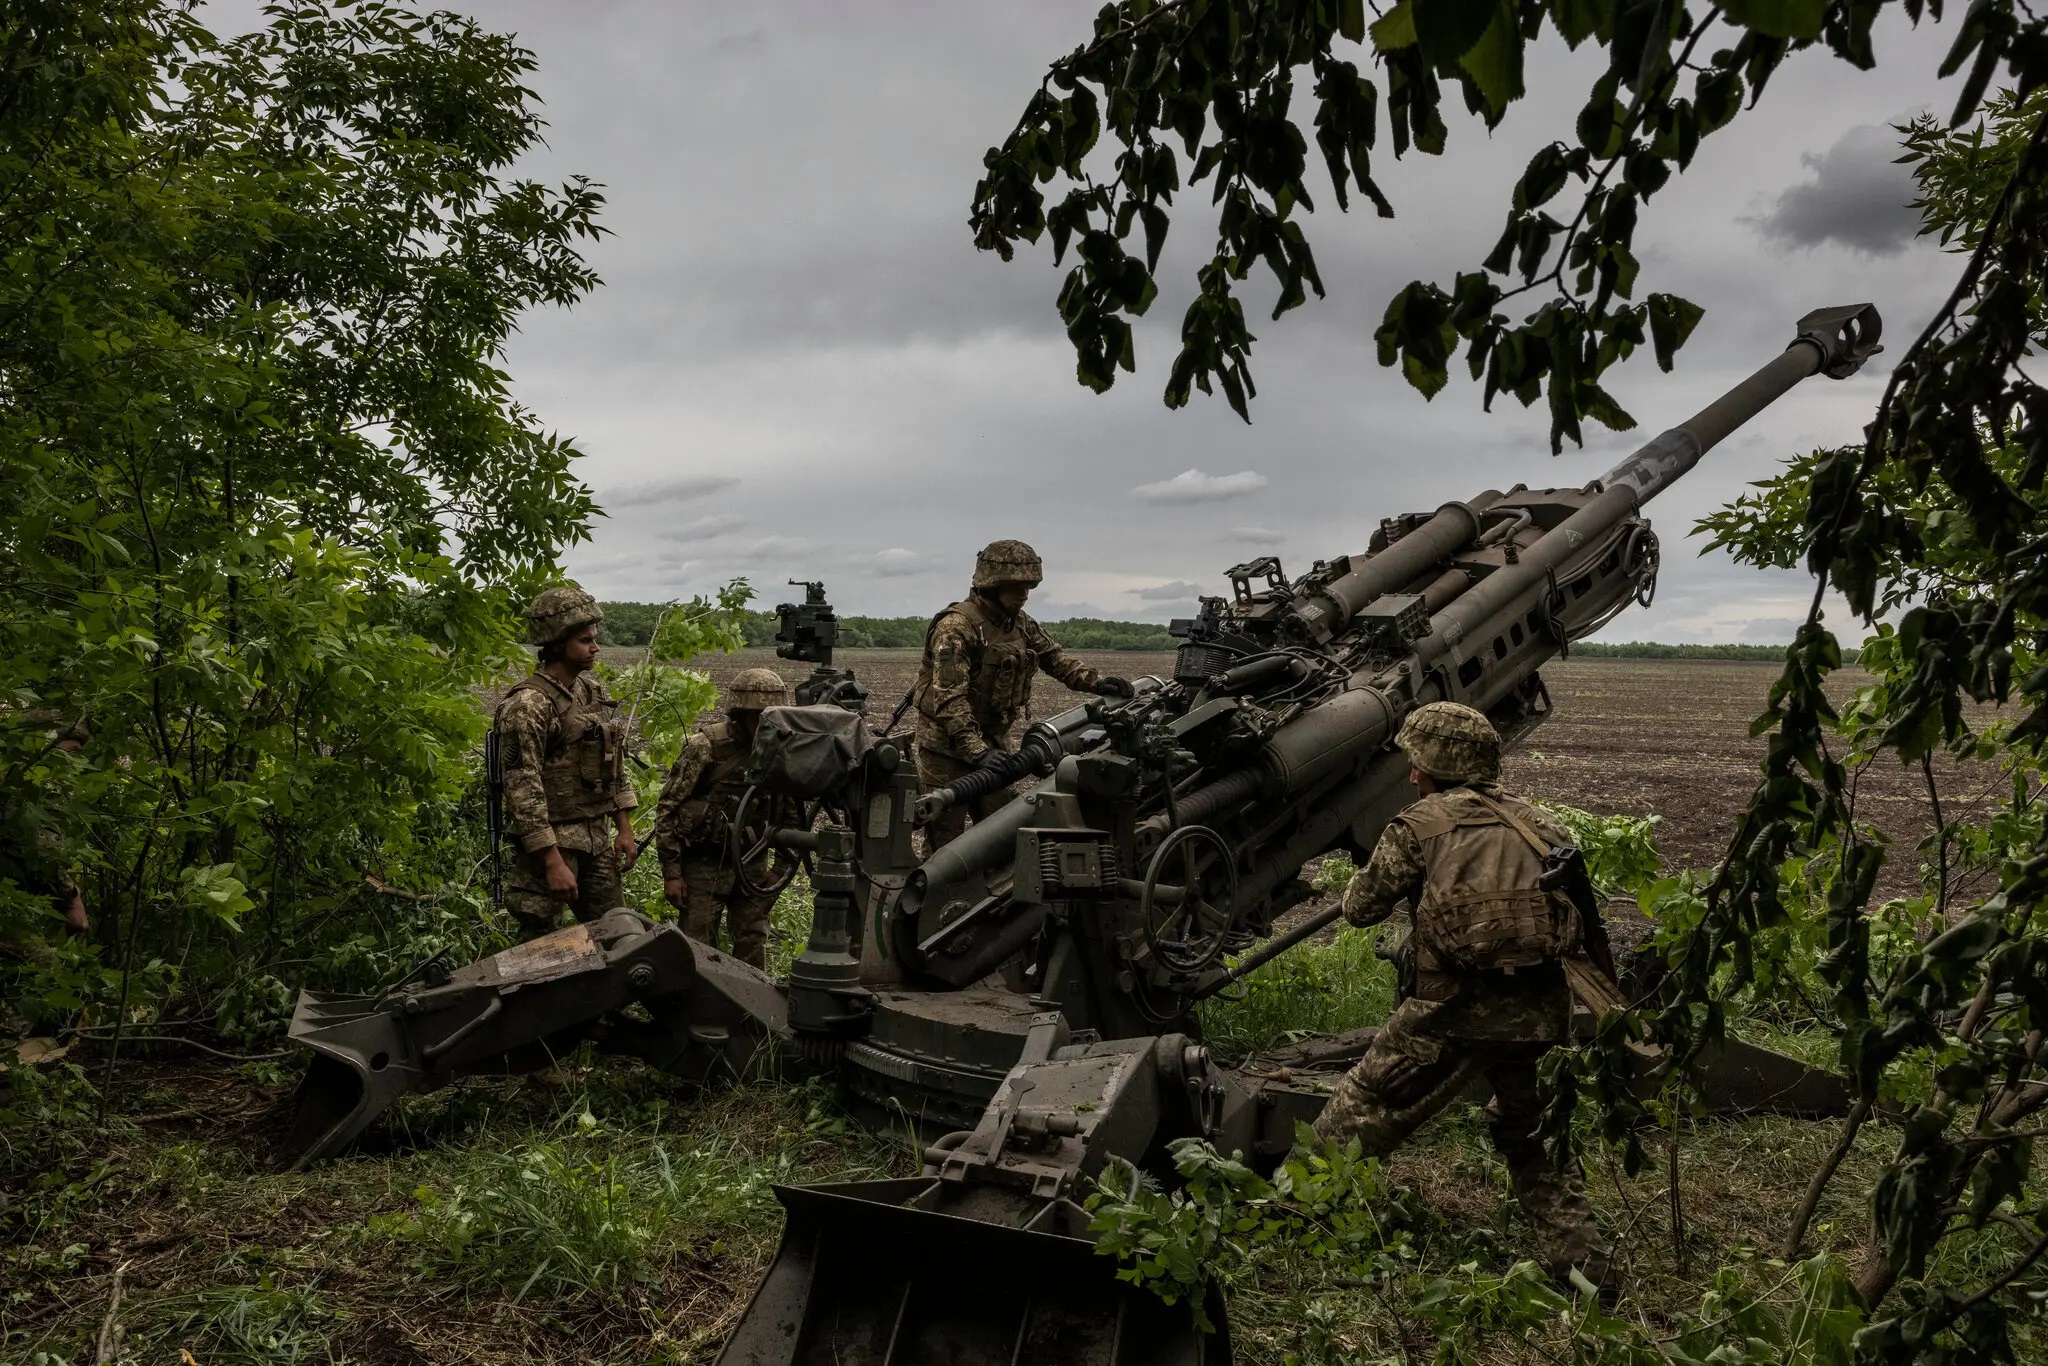 Up to 50,000 rounds a day: a day of war in Ukraine equals a month in Afghanistan in terms of the amount of artillery used - NYT